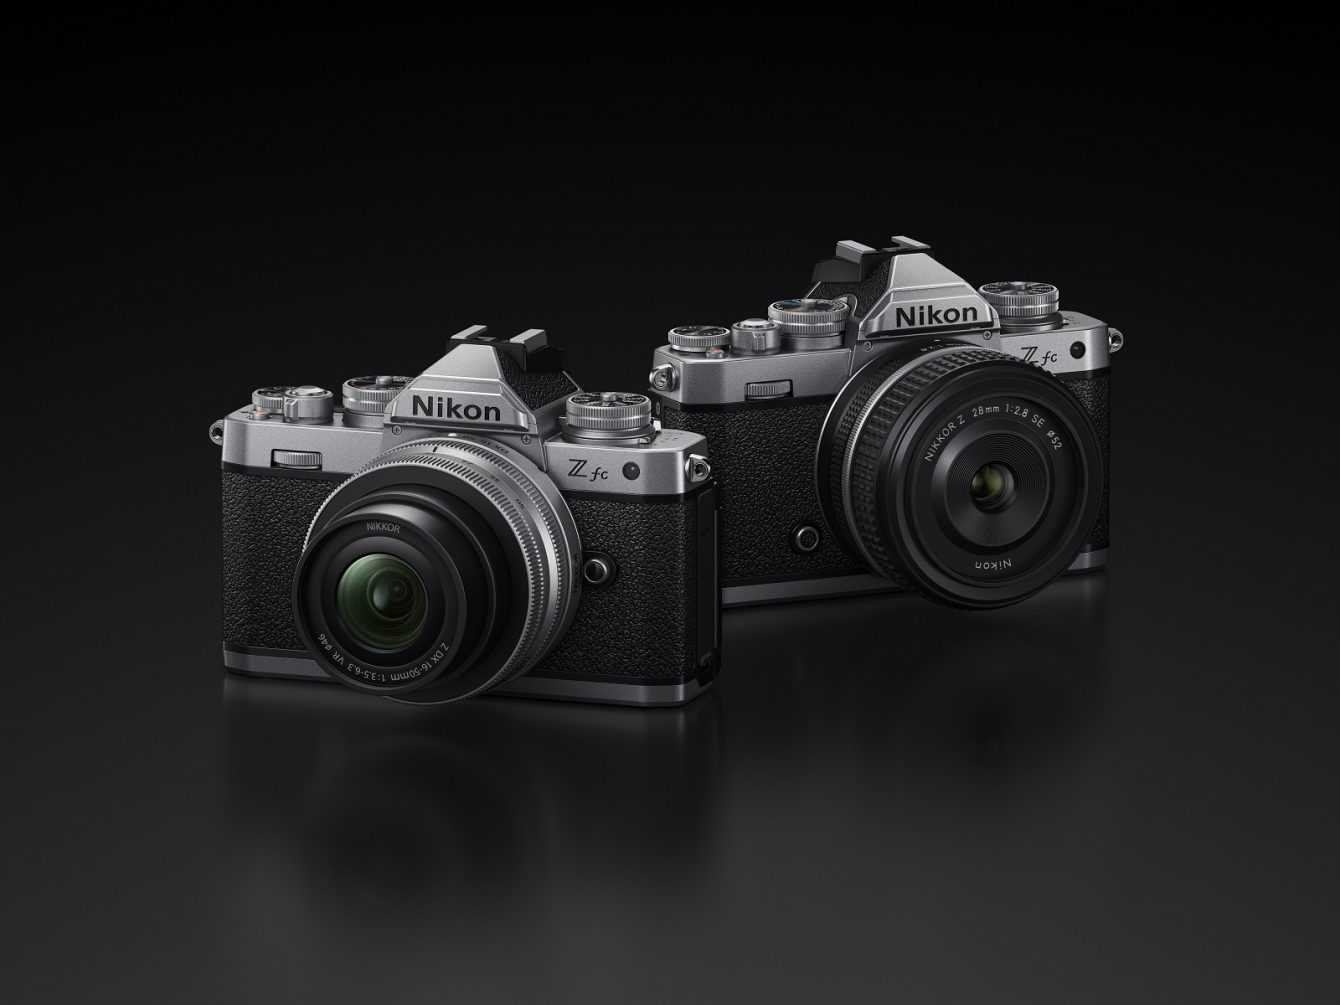 Nikon Z fc: price and release in Italy